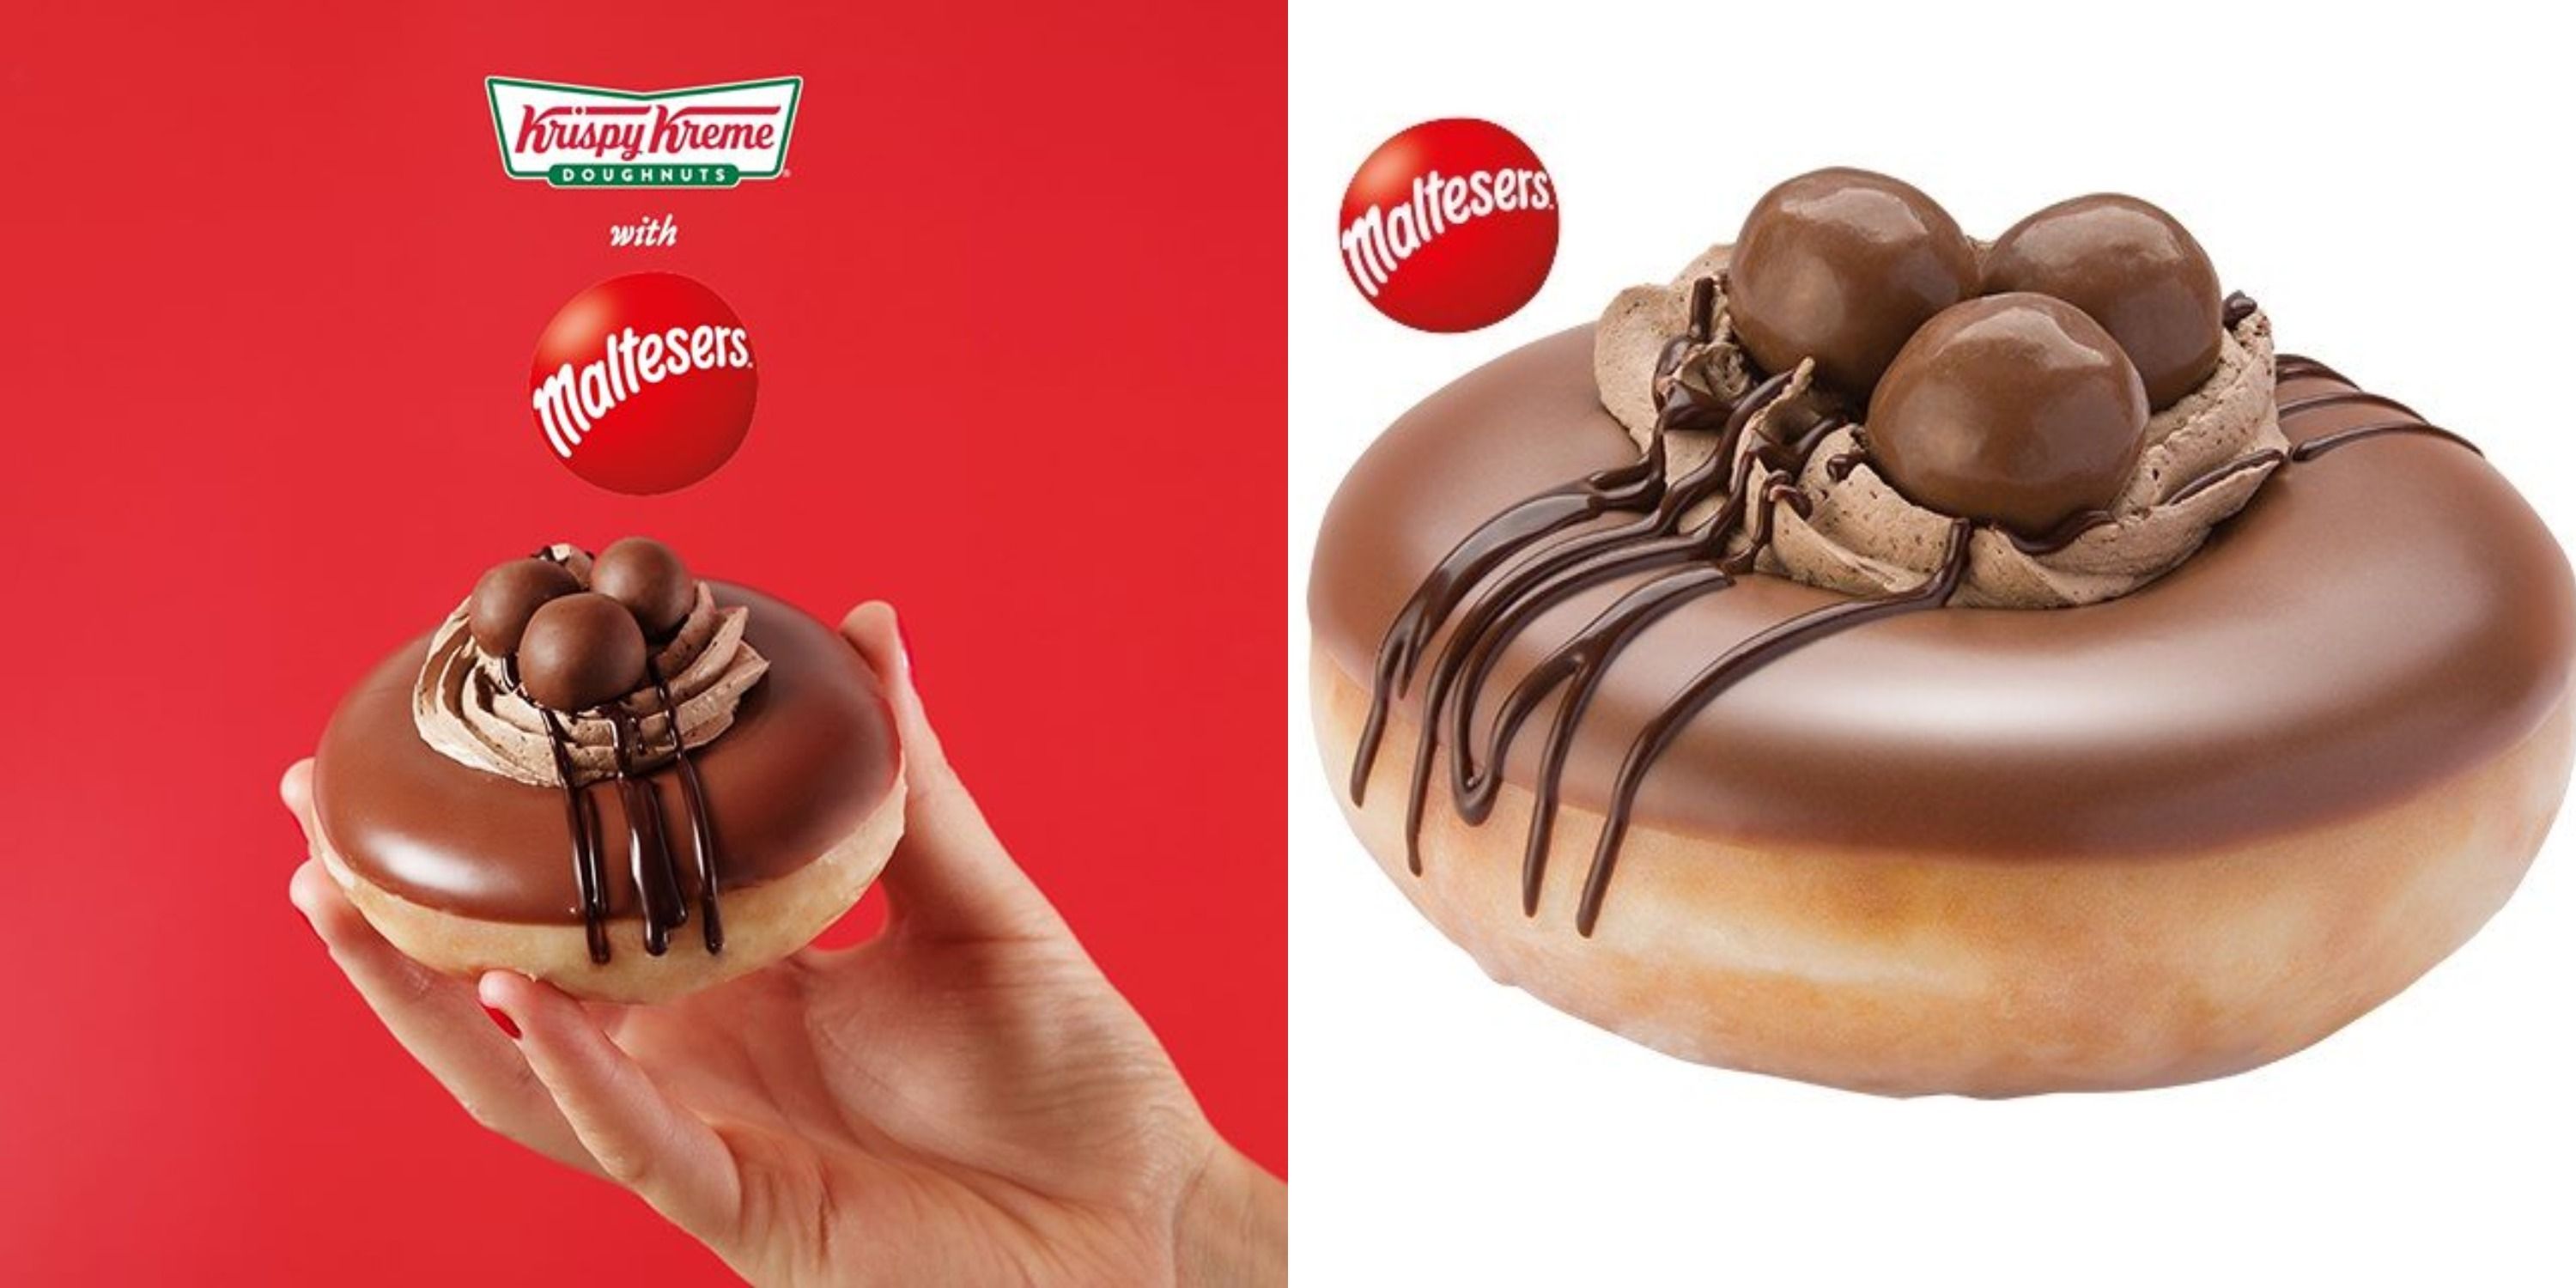 Krispy Kreme Released A New Donut Topped With Maltesers Chocolate